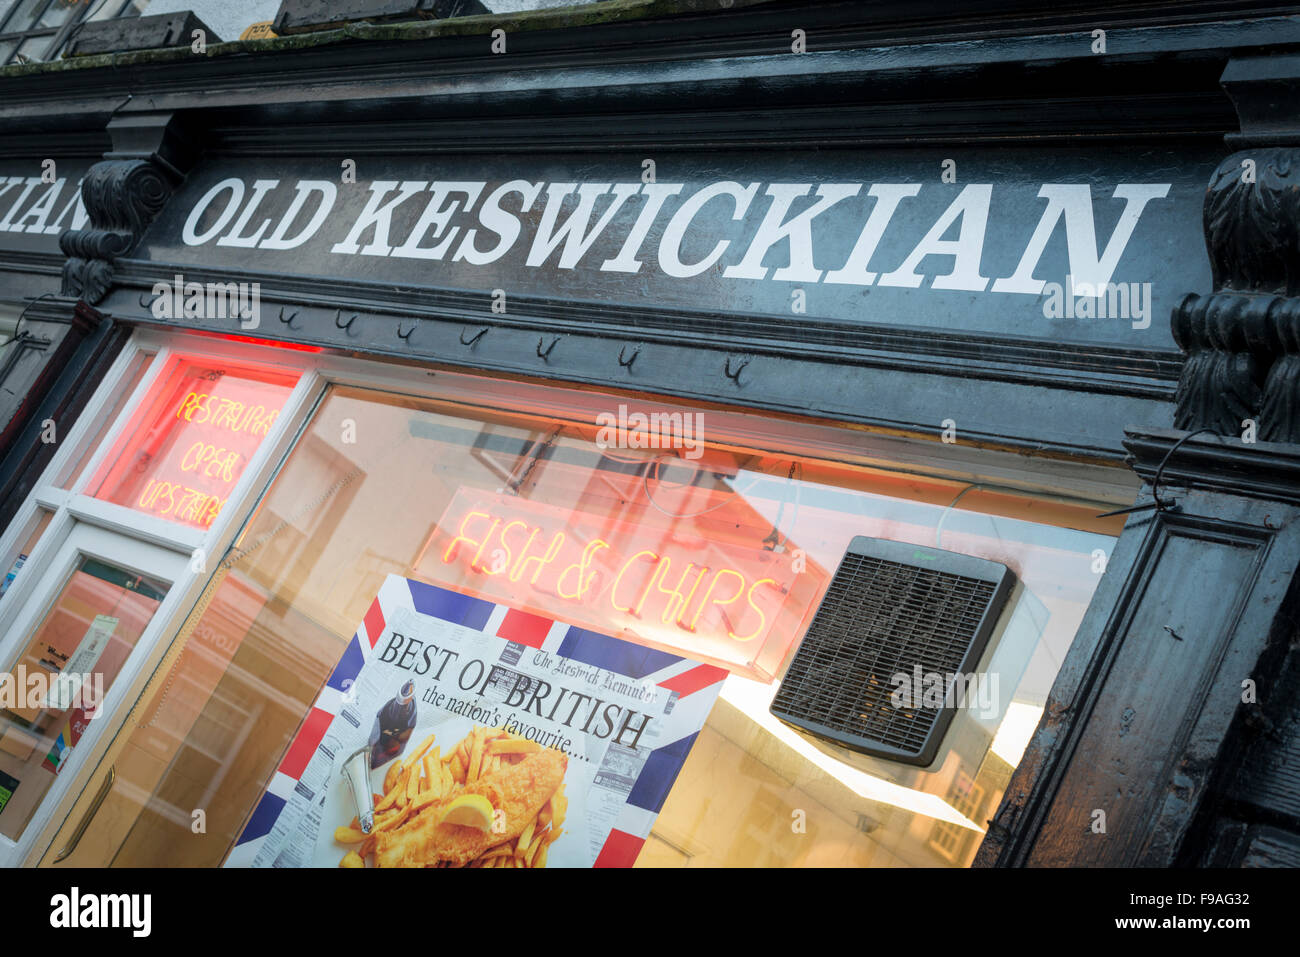 The Old Keswickian fish and chip shop and restaurant in Keswick Cumbria UK Stock Photo